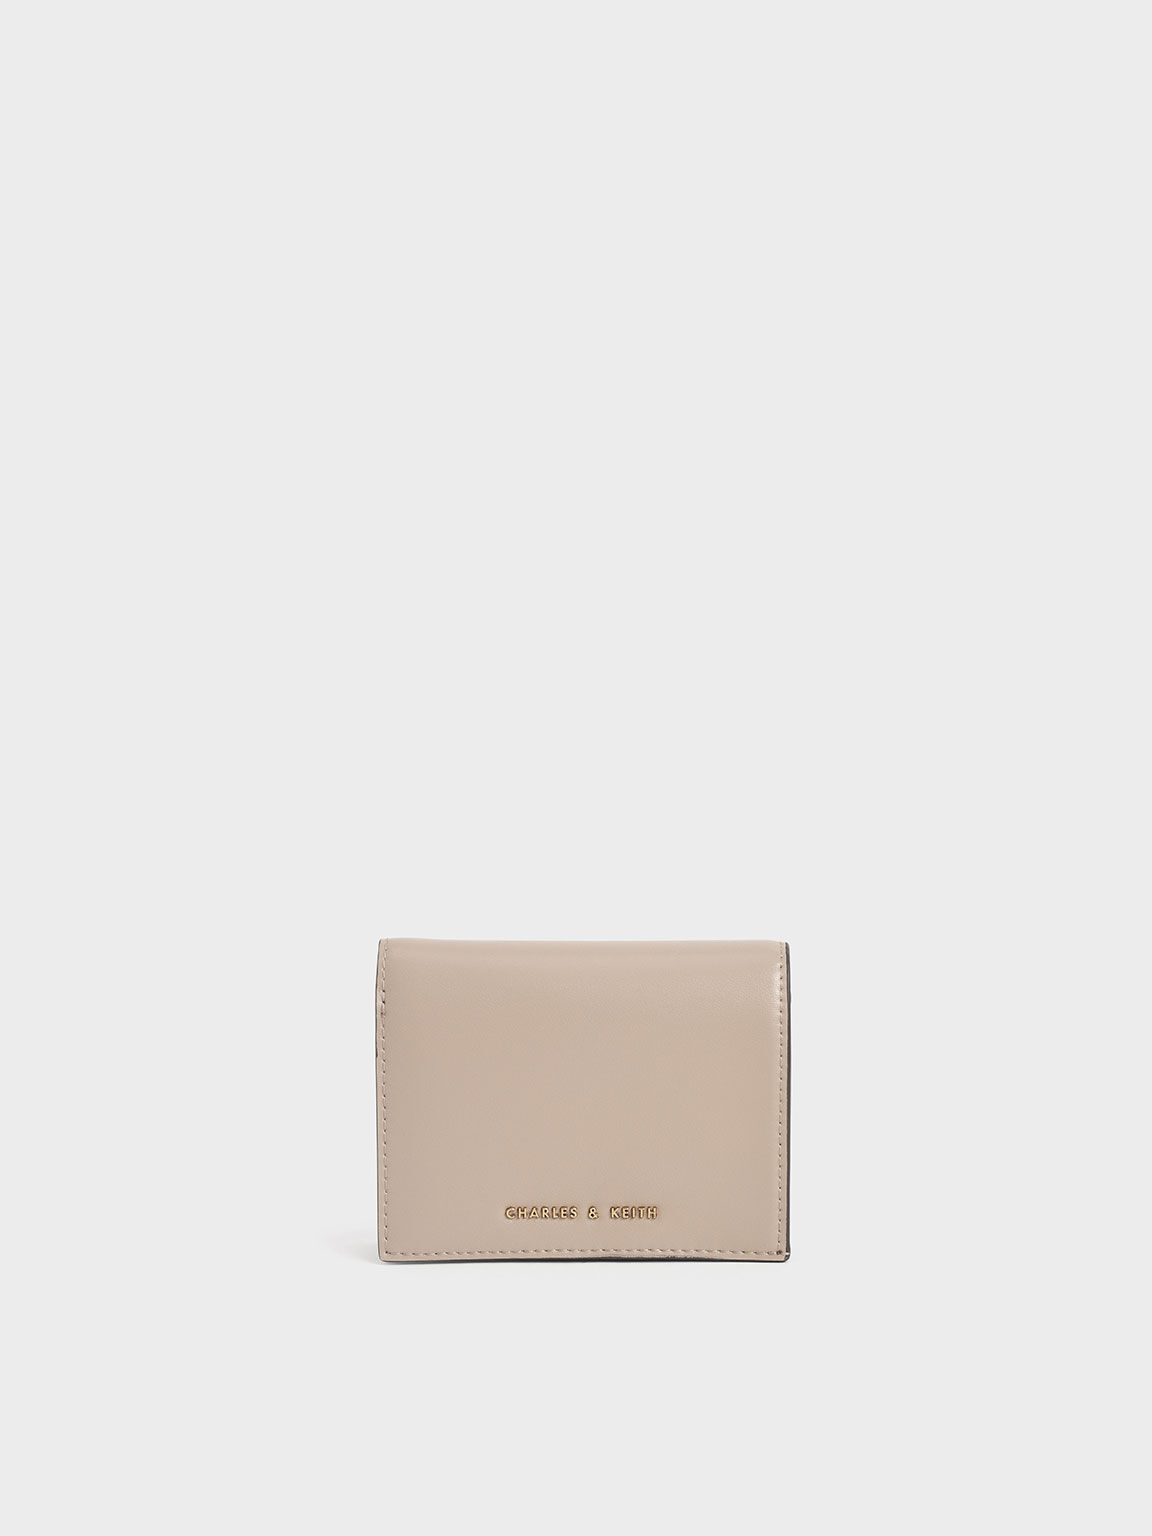 Women's Wallets | Shop Exclusive Styles | CHARLES & KEITH NL